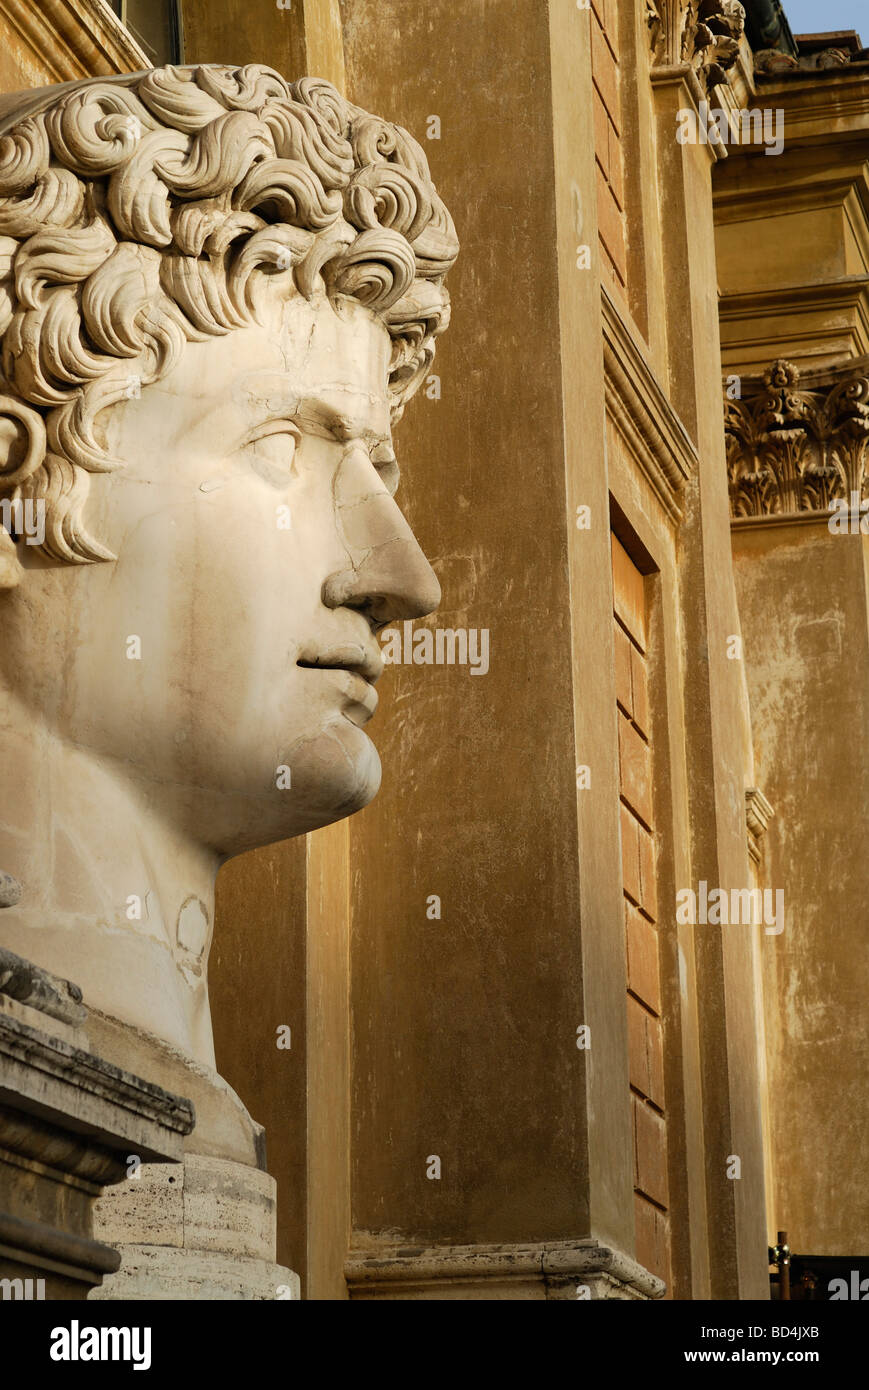 Rome Italy Vatican Museums Giant bust of Caesar Augustus in the Cortile della Pigna Stock Photo